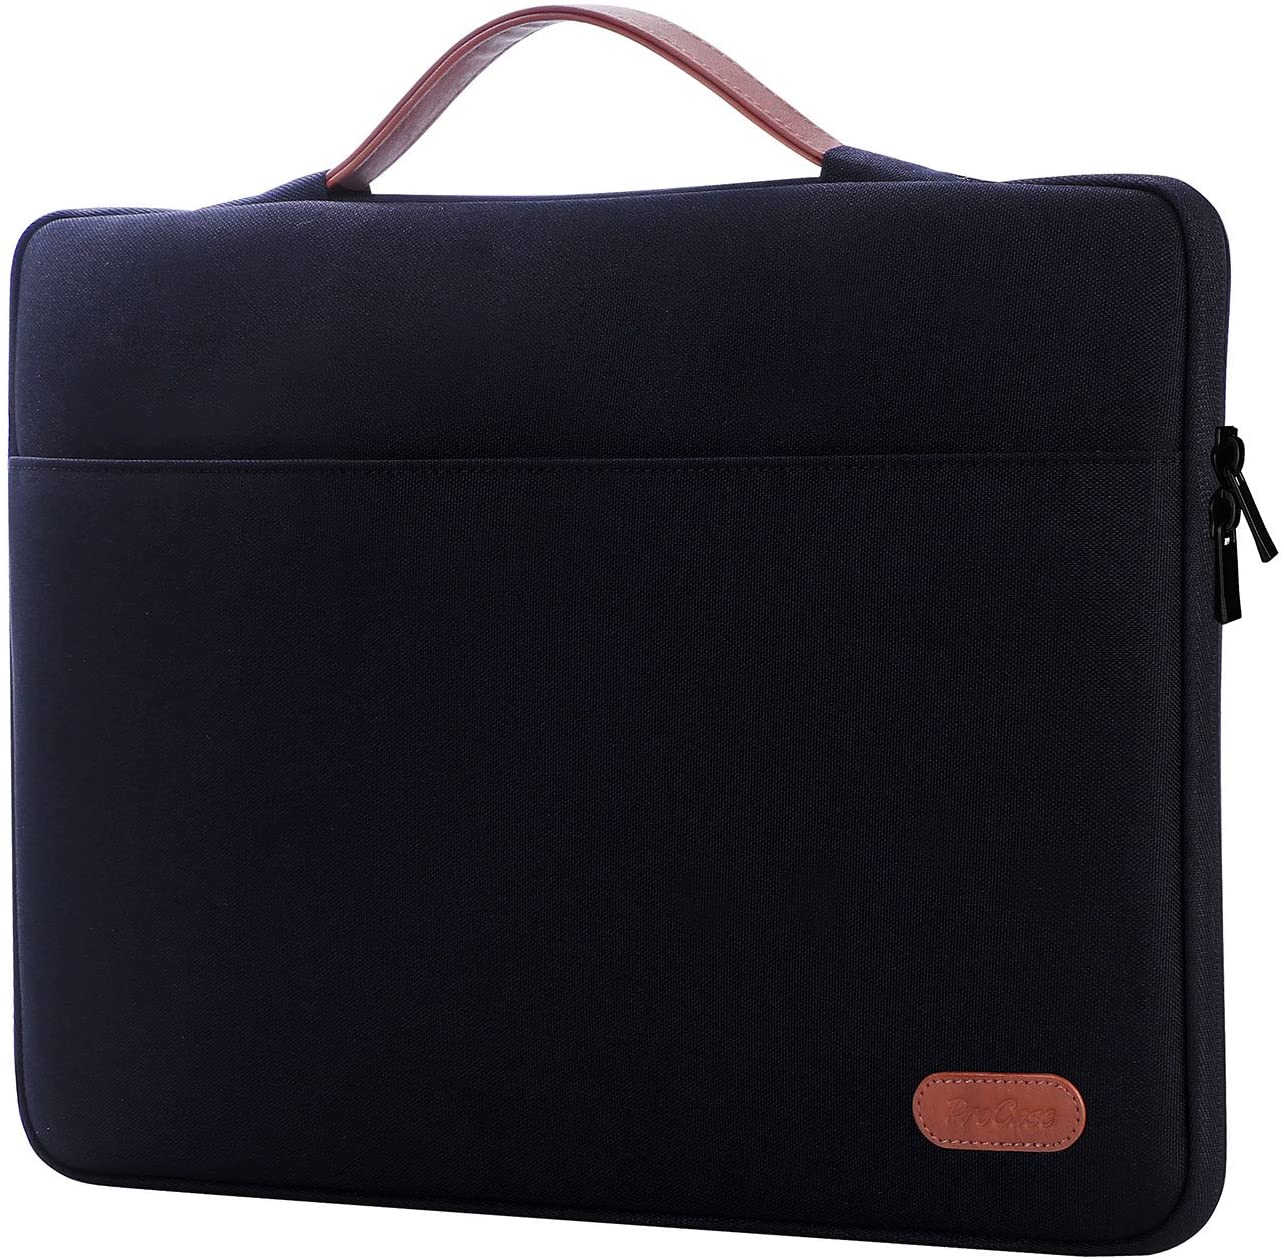 Laptop Sleeve Case Protective Bag by Procase